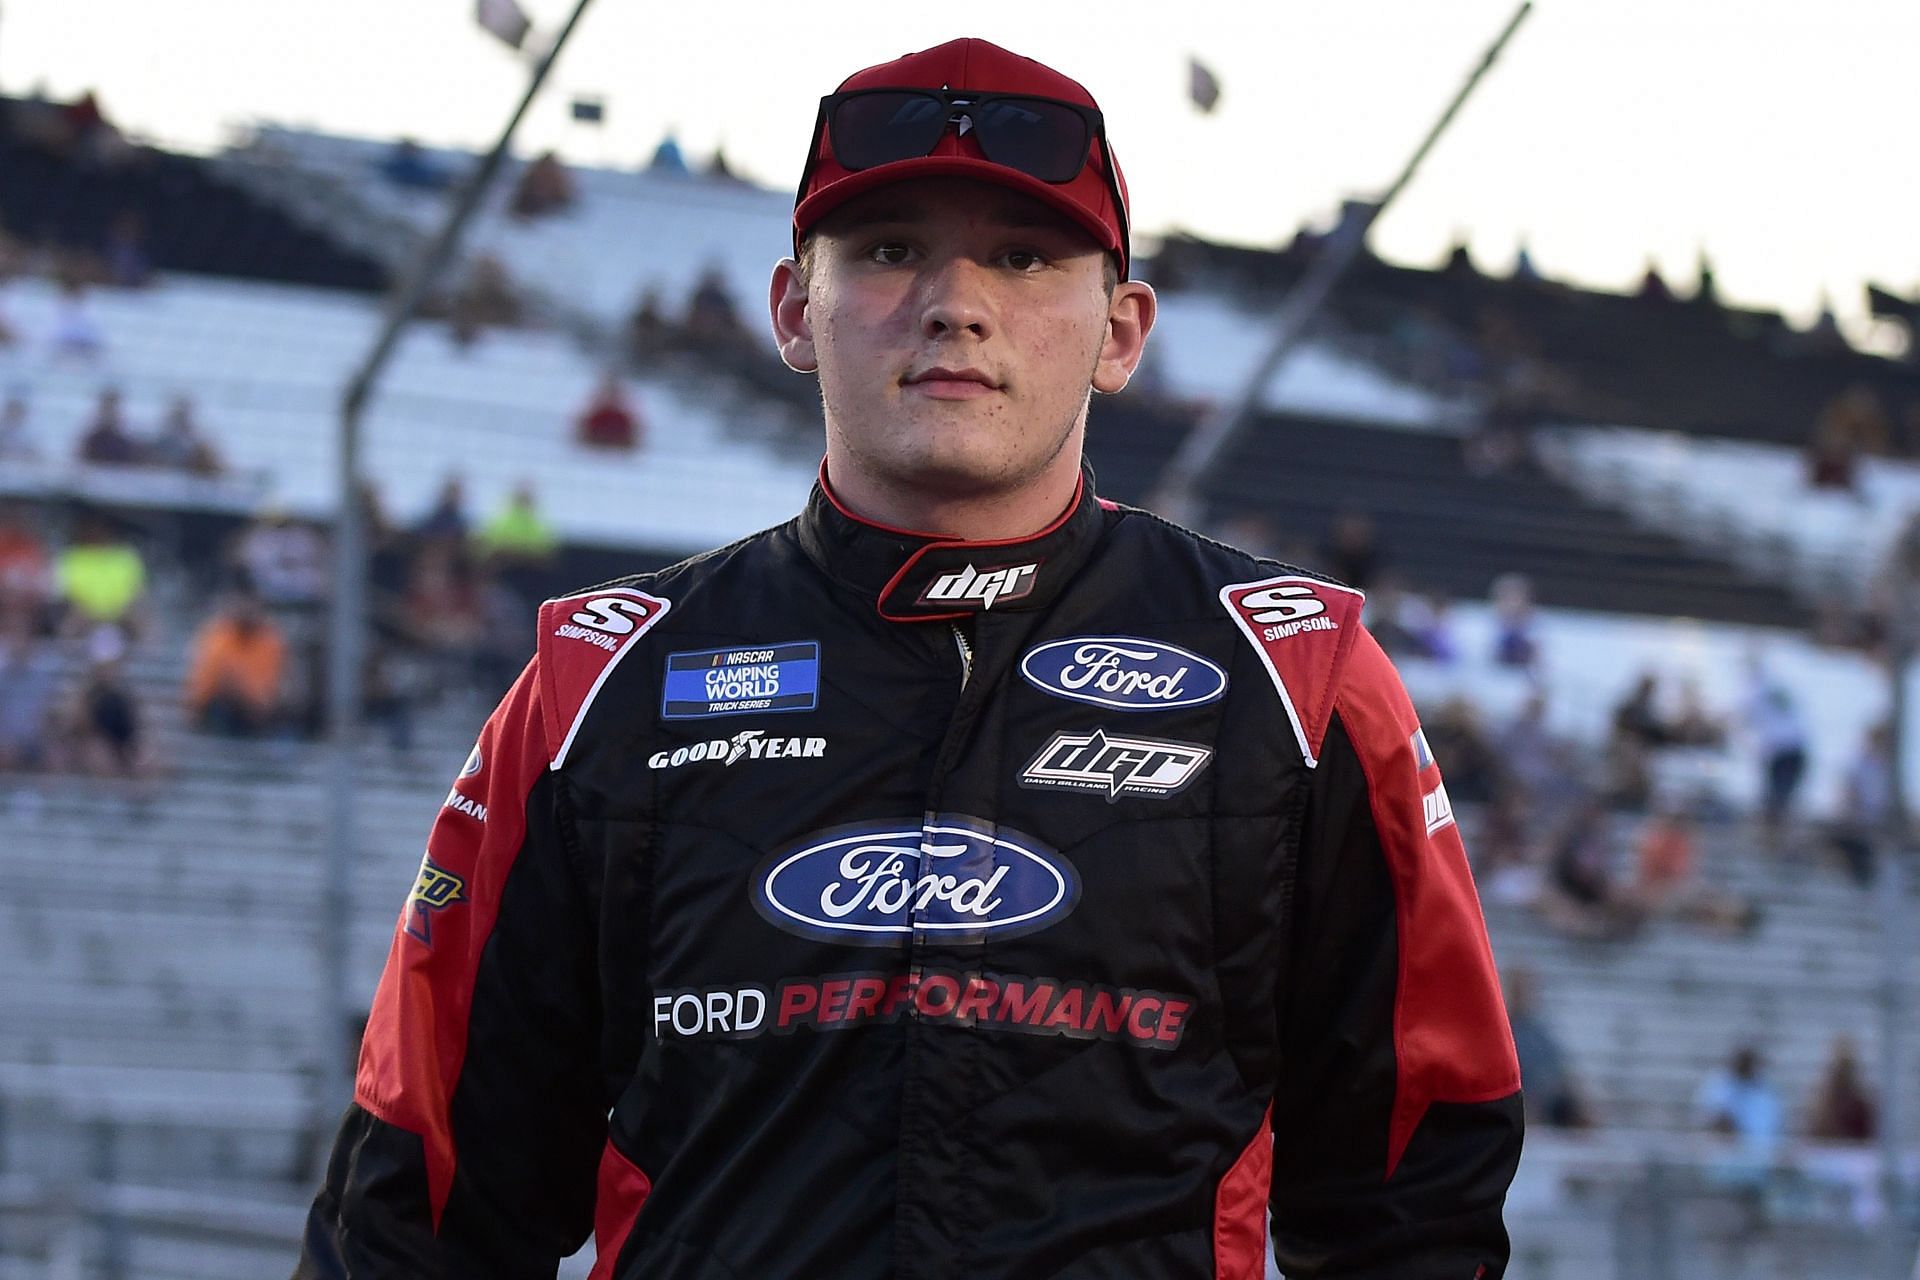 Taylor Gray at NASCAR Camping World Truck Series Toyota 200 presented by CK Power at Gateway